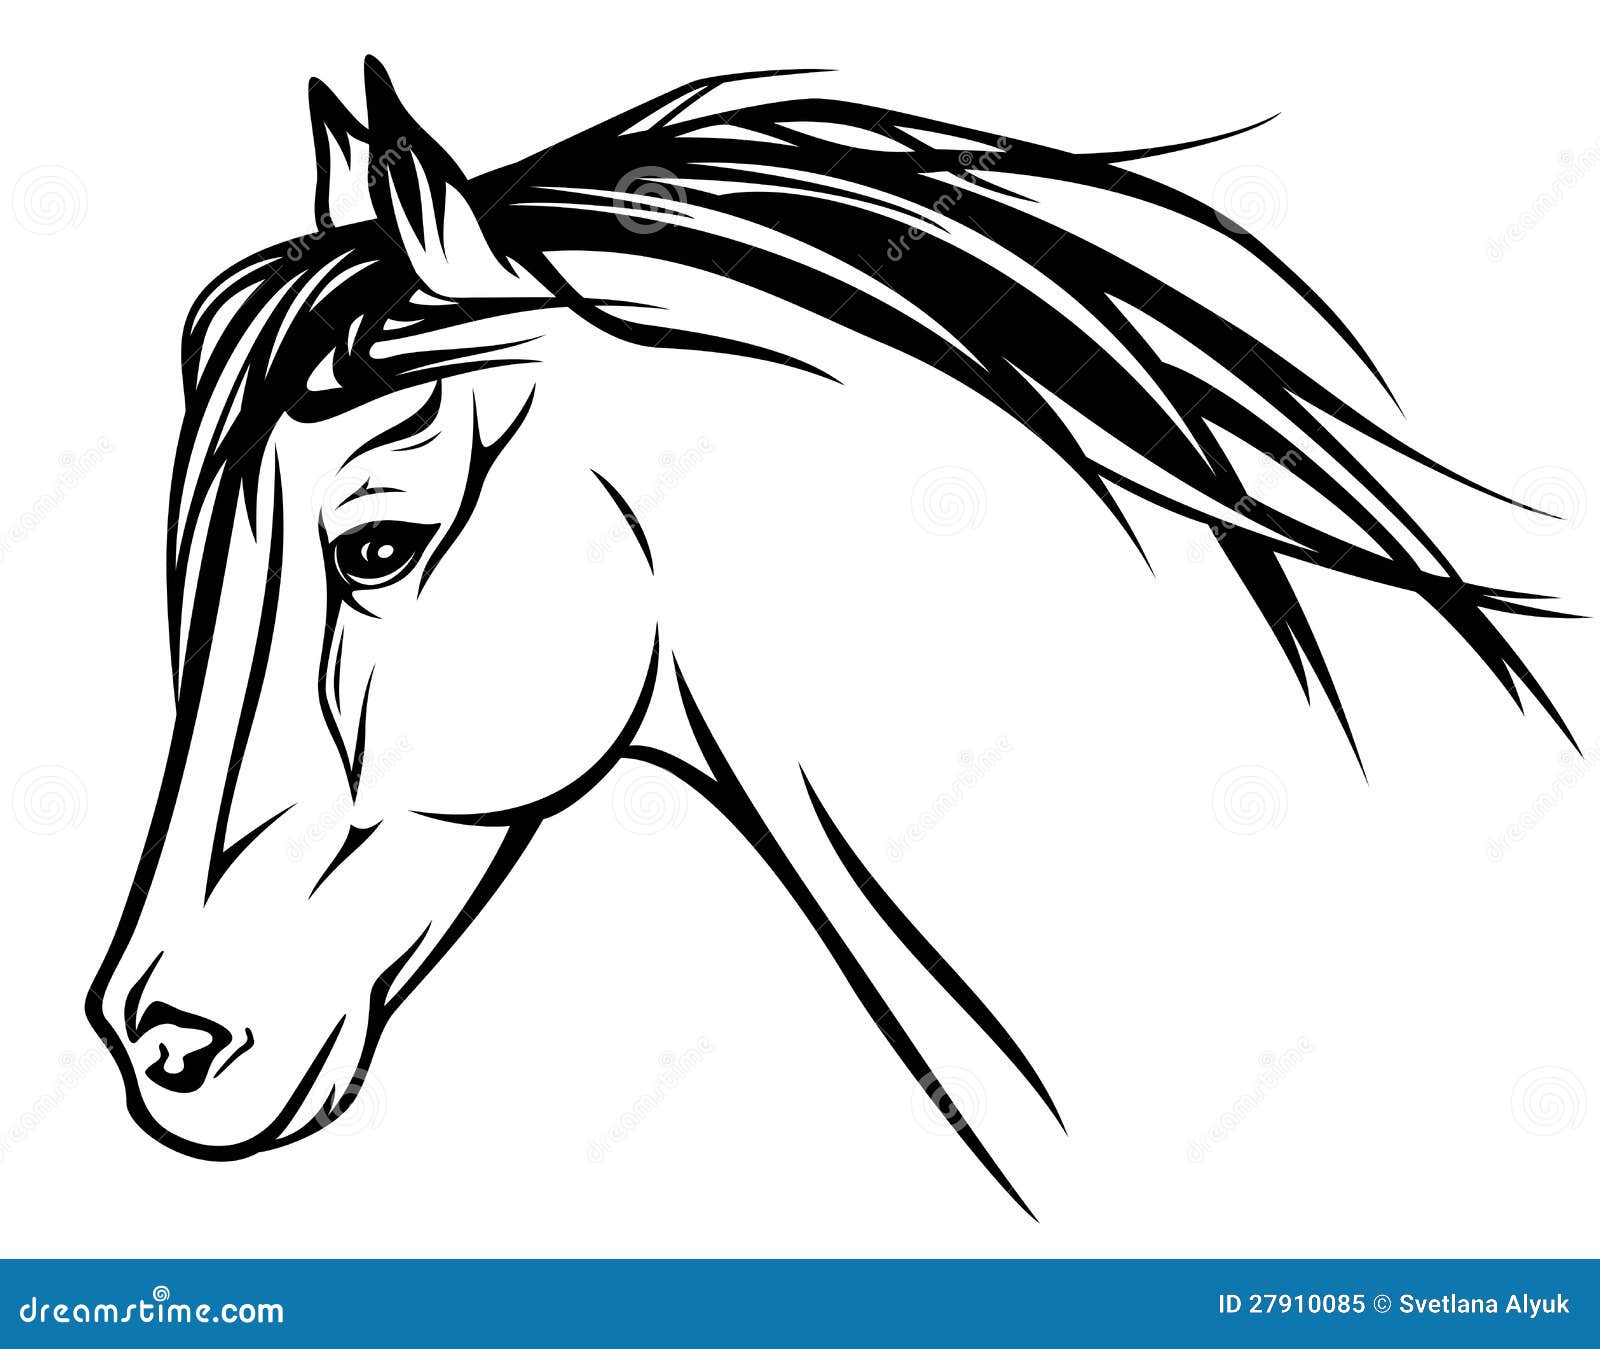 horses face black and white clipart